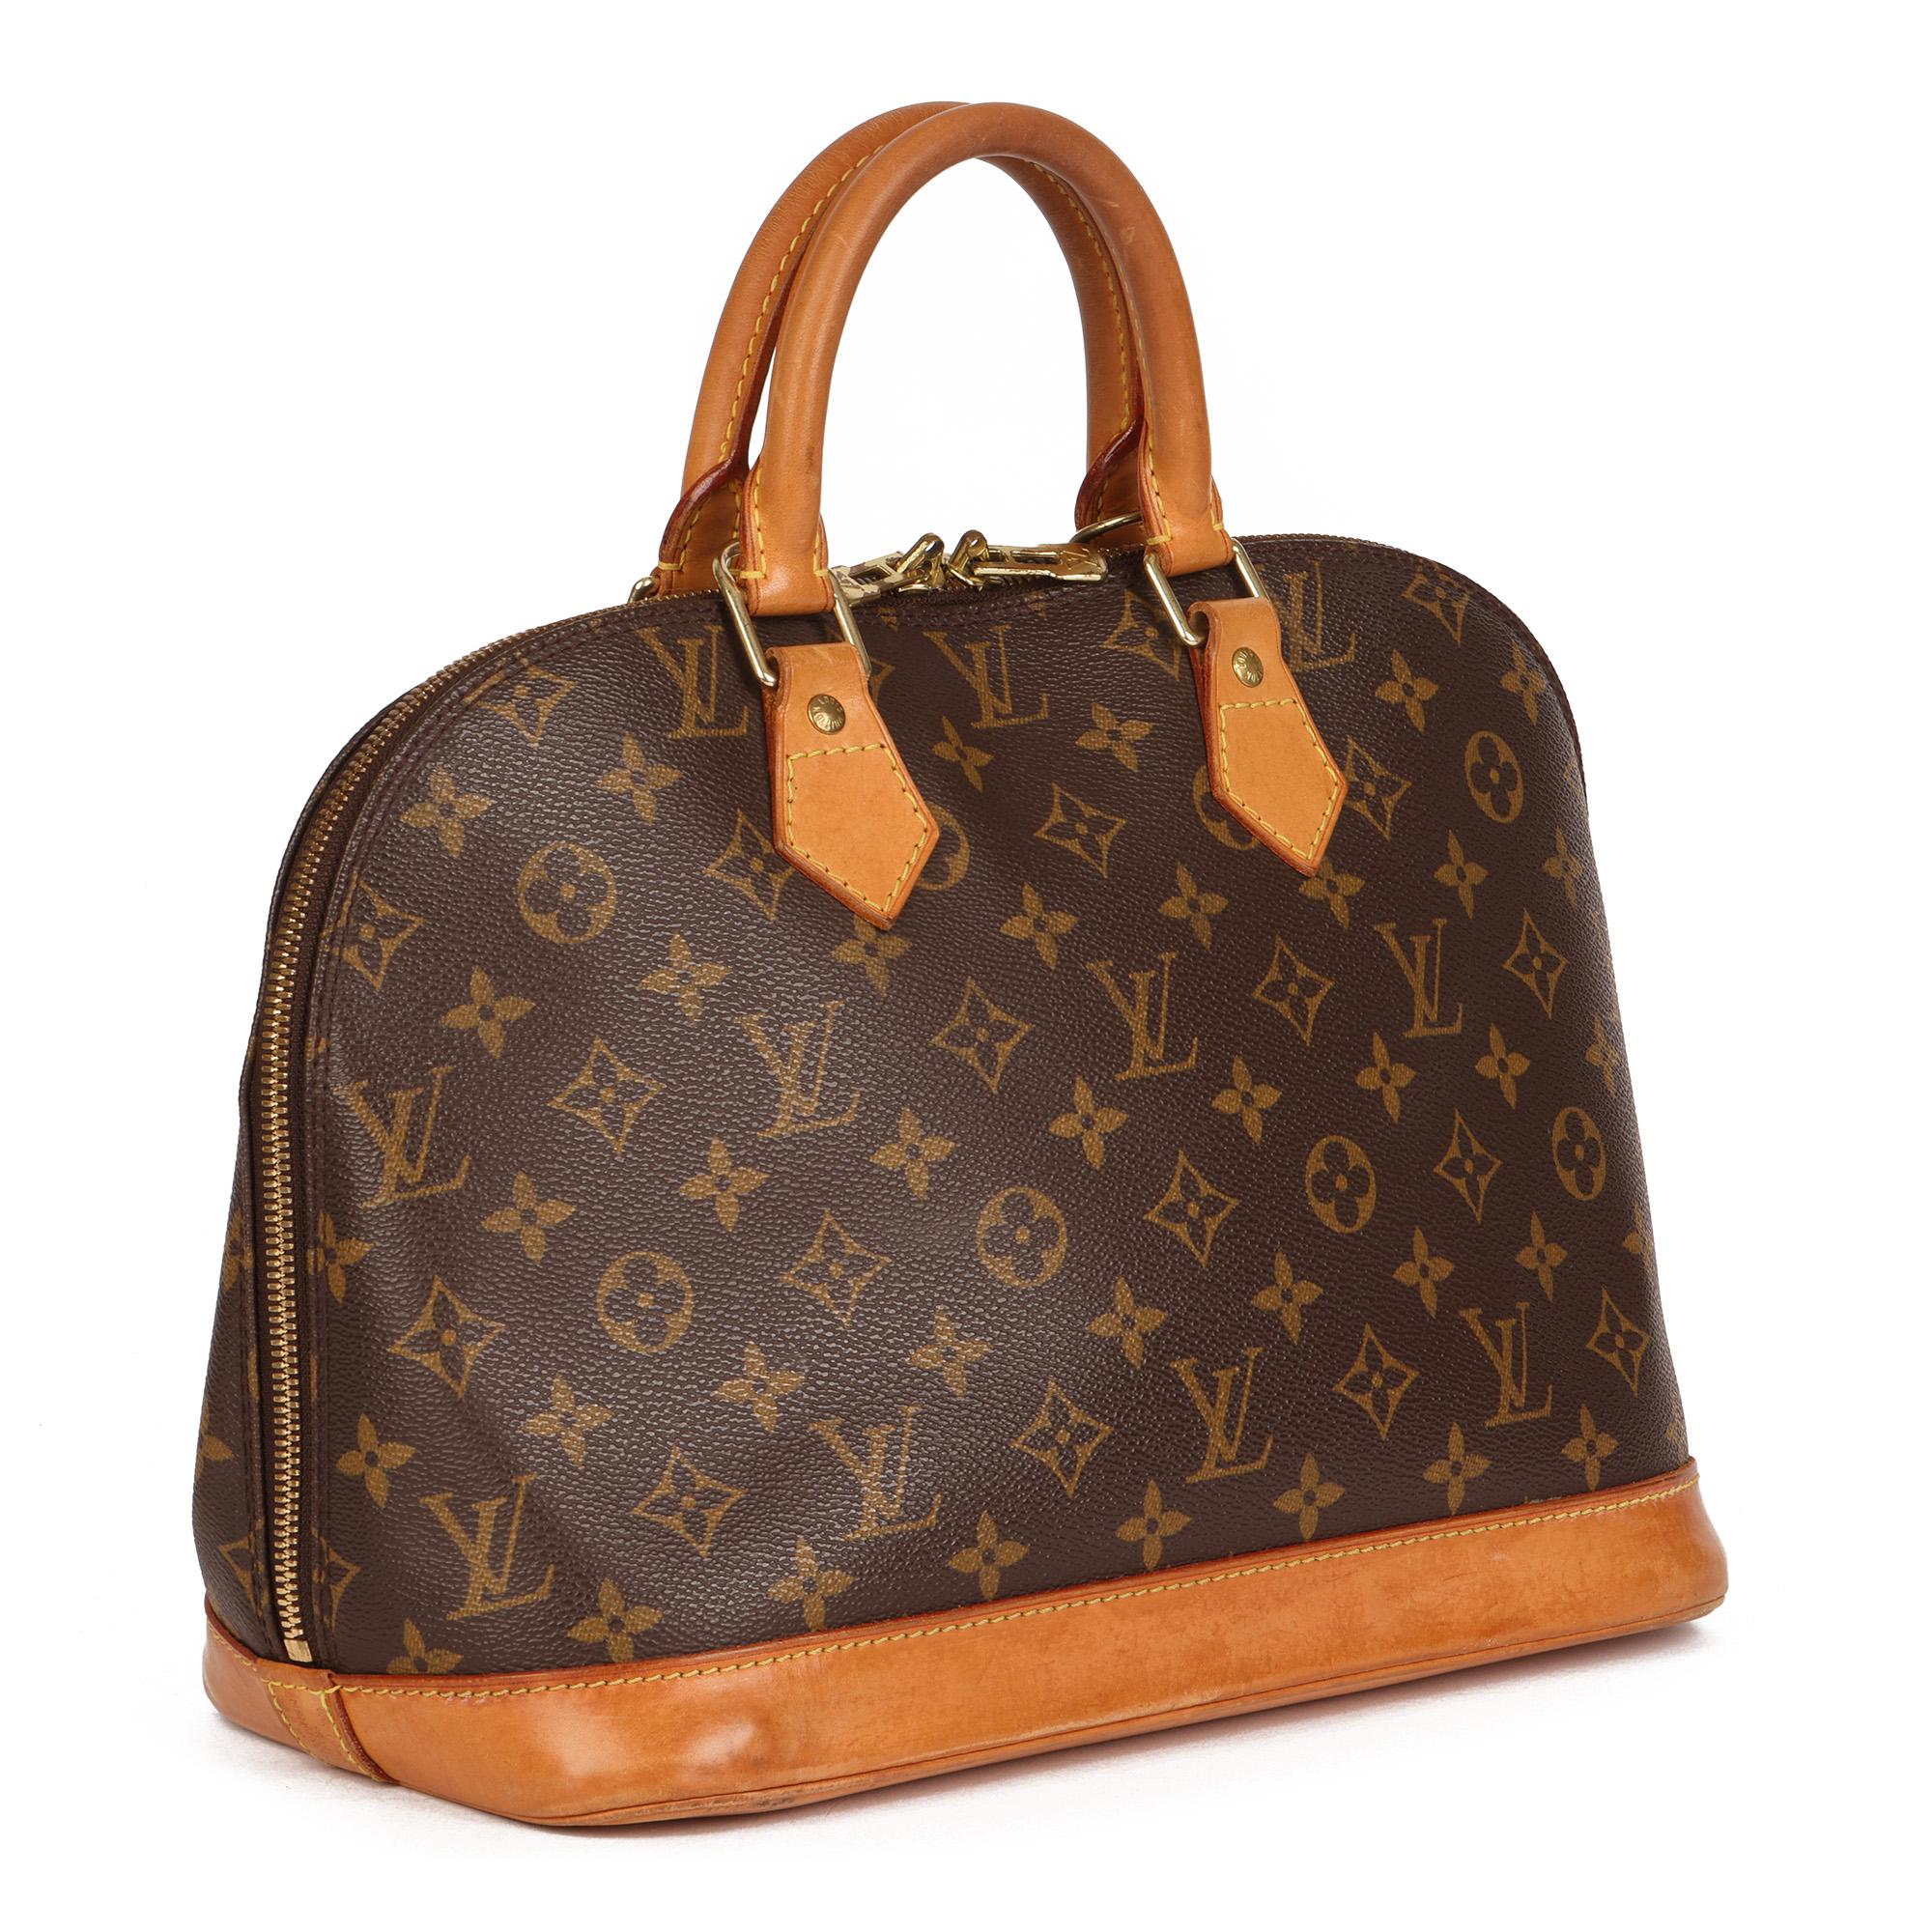 LOUIS VUITTON
Brown Coated Canvas & Vachetta Leather Vintage Alma PM

Xupes Reference: CB539
Serial Number: FL1000
Age (Circa): 2000
Authenticity Details: Date Stamp (Made in France)
Gender: Ladies
Type: Tote

Colour: Brown
Hardware: Golden